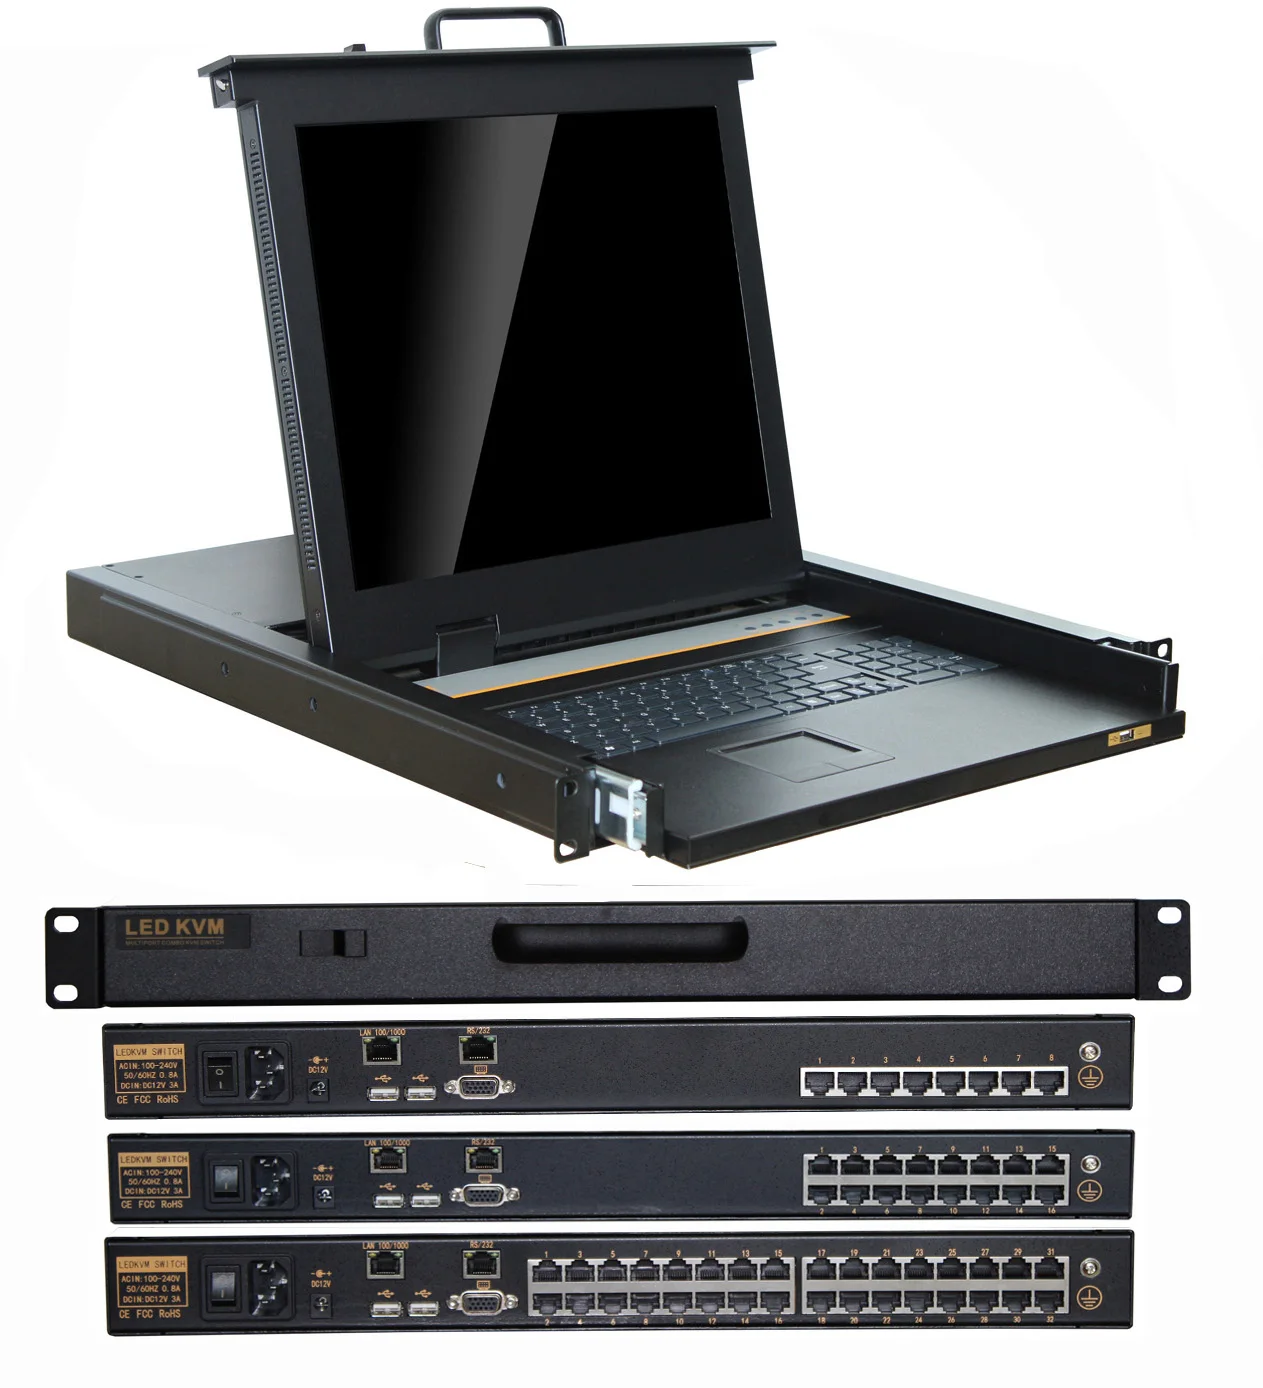 

Industrial network digital output with 8port  lcd kvm switch Kit with USB/VGA kvm switch -KVM1908C